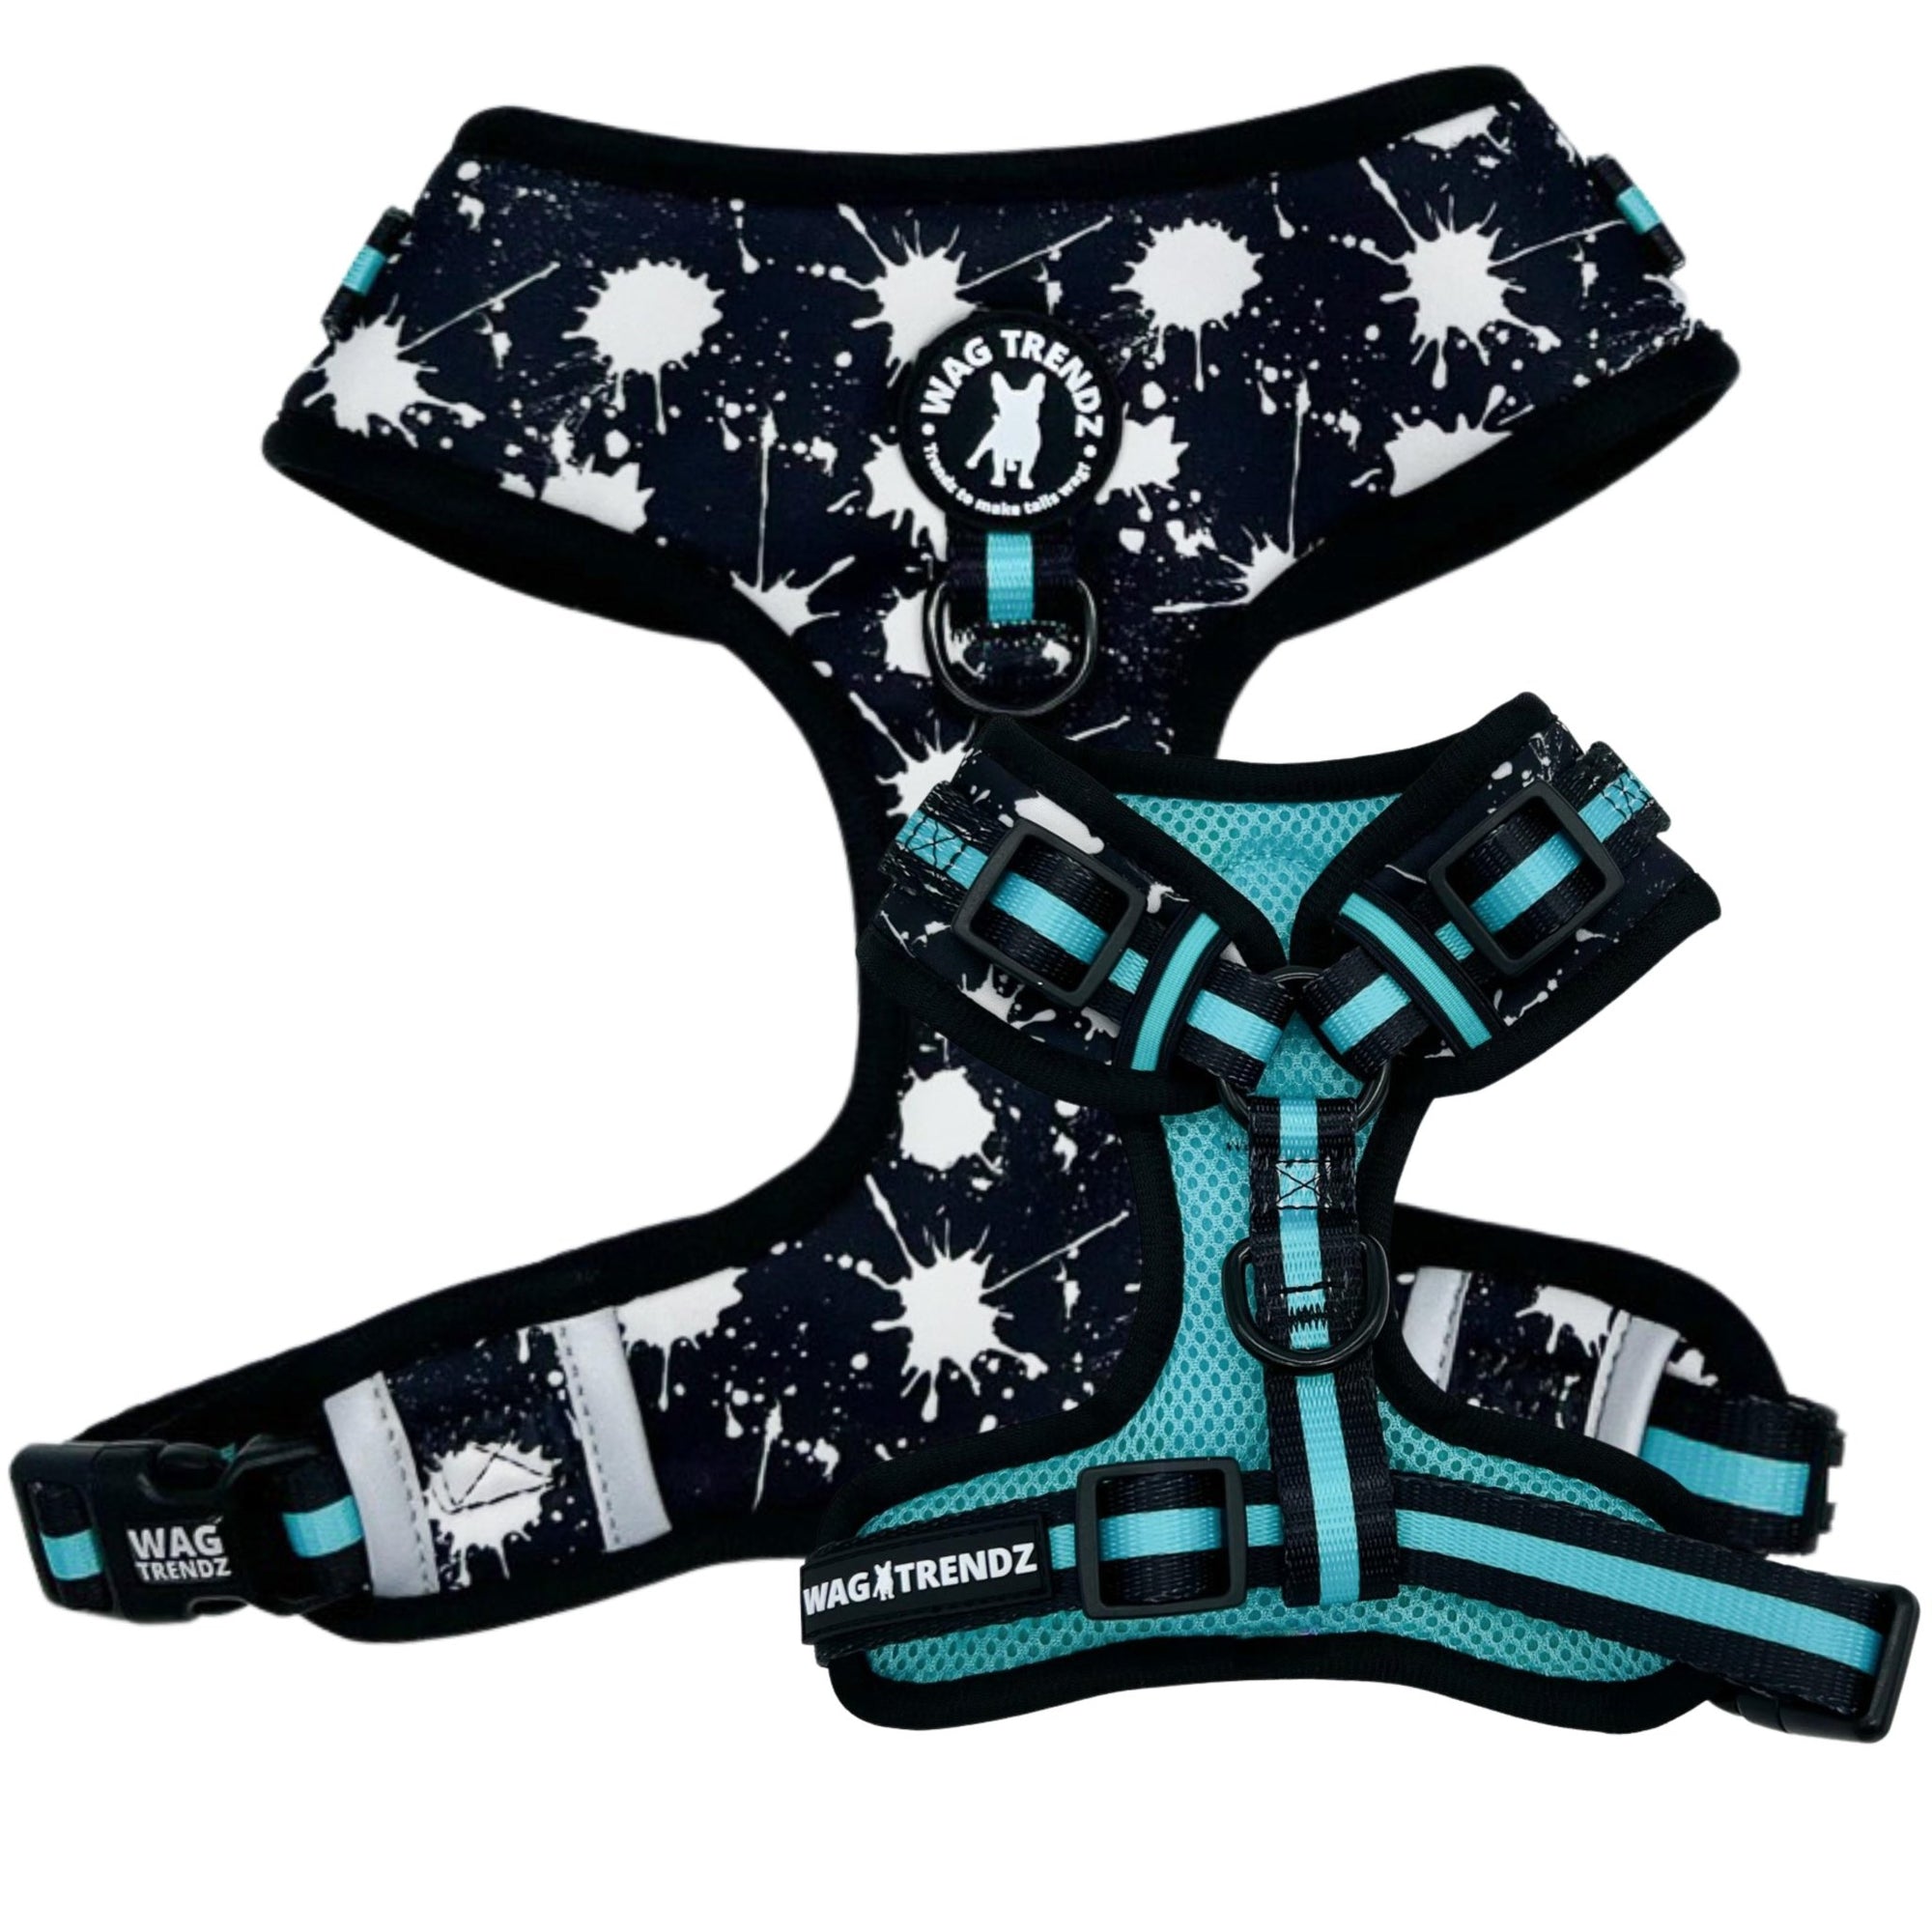 No Pull Dog Harness - black adjustable harness with white paint splatter and teal accents - front clip for no pull training - against a solid white background - Wag Trendz